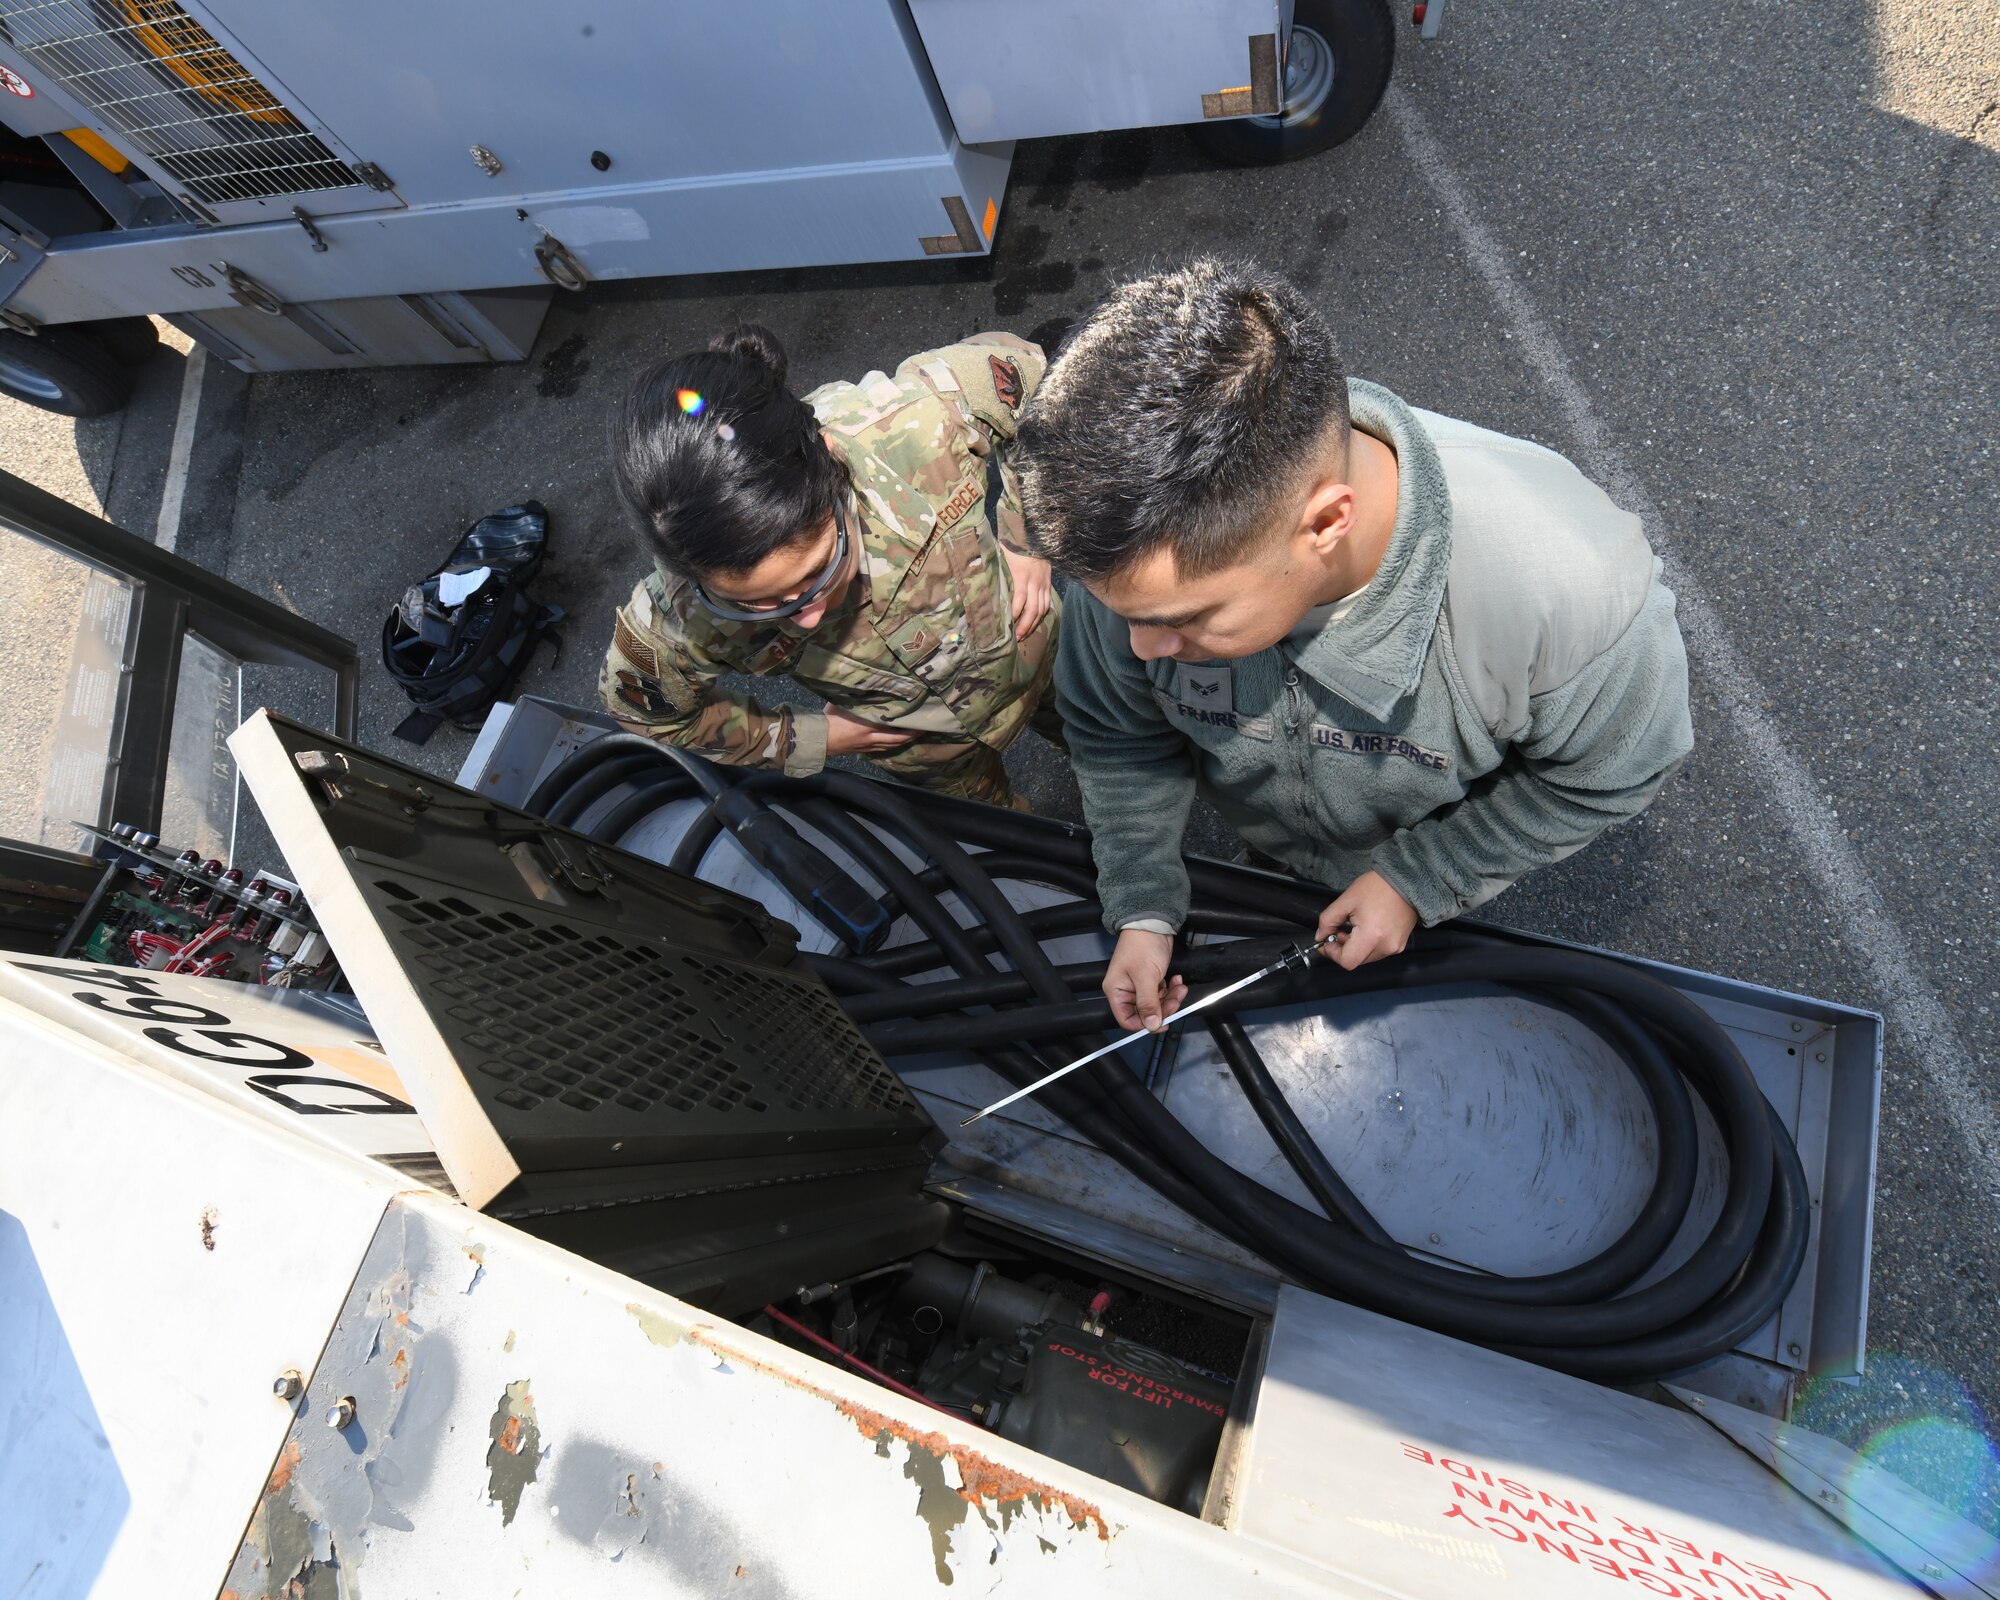 Senior Airman Miguel Fraire, 9th Maintenance Squadron aerospace ground equipment technician, and Senior Airman Sierra Garcia, 9th MXS AGE apprentice, inspect the oil on a generator, Jan. 7, 2020 at Beale Air Force Base California. These professionals play a big role on helping the 9th Reconnaissance Wing accomplish its mission by providing the needed equipment to requesting units. (U.S. Air Force photo by Airman 1st Class Luis A. Ruiz-Vazquez)